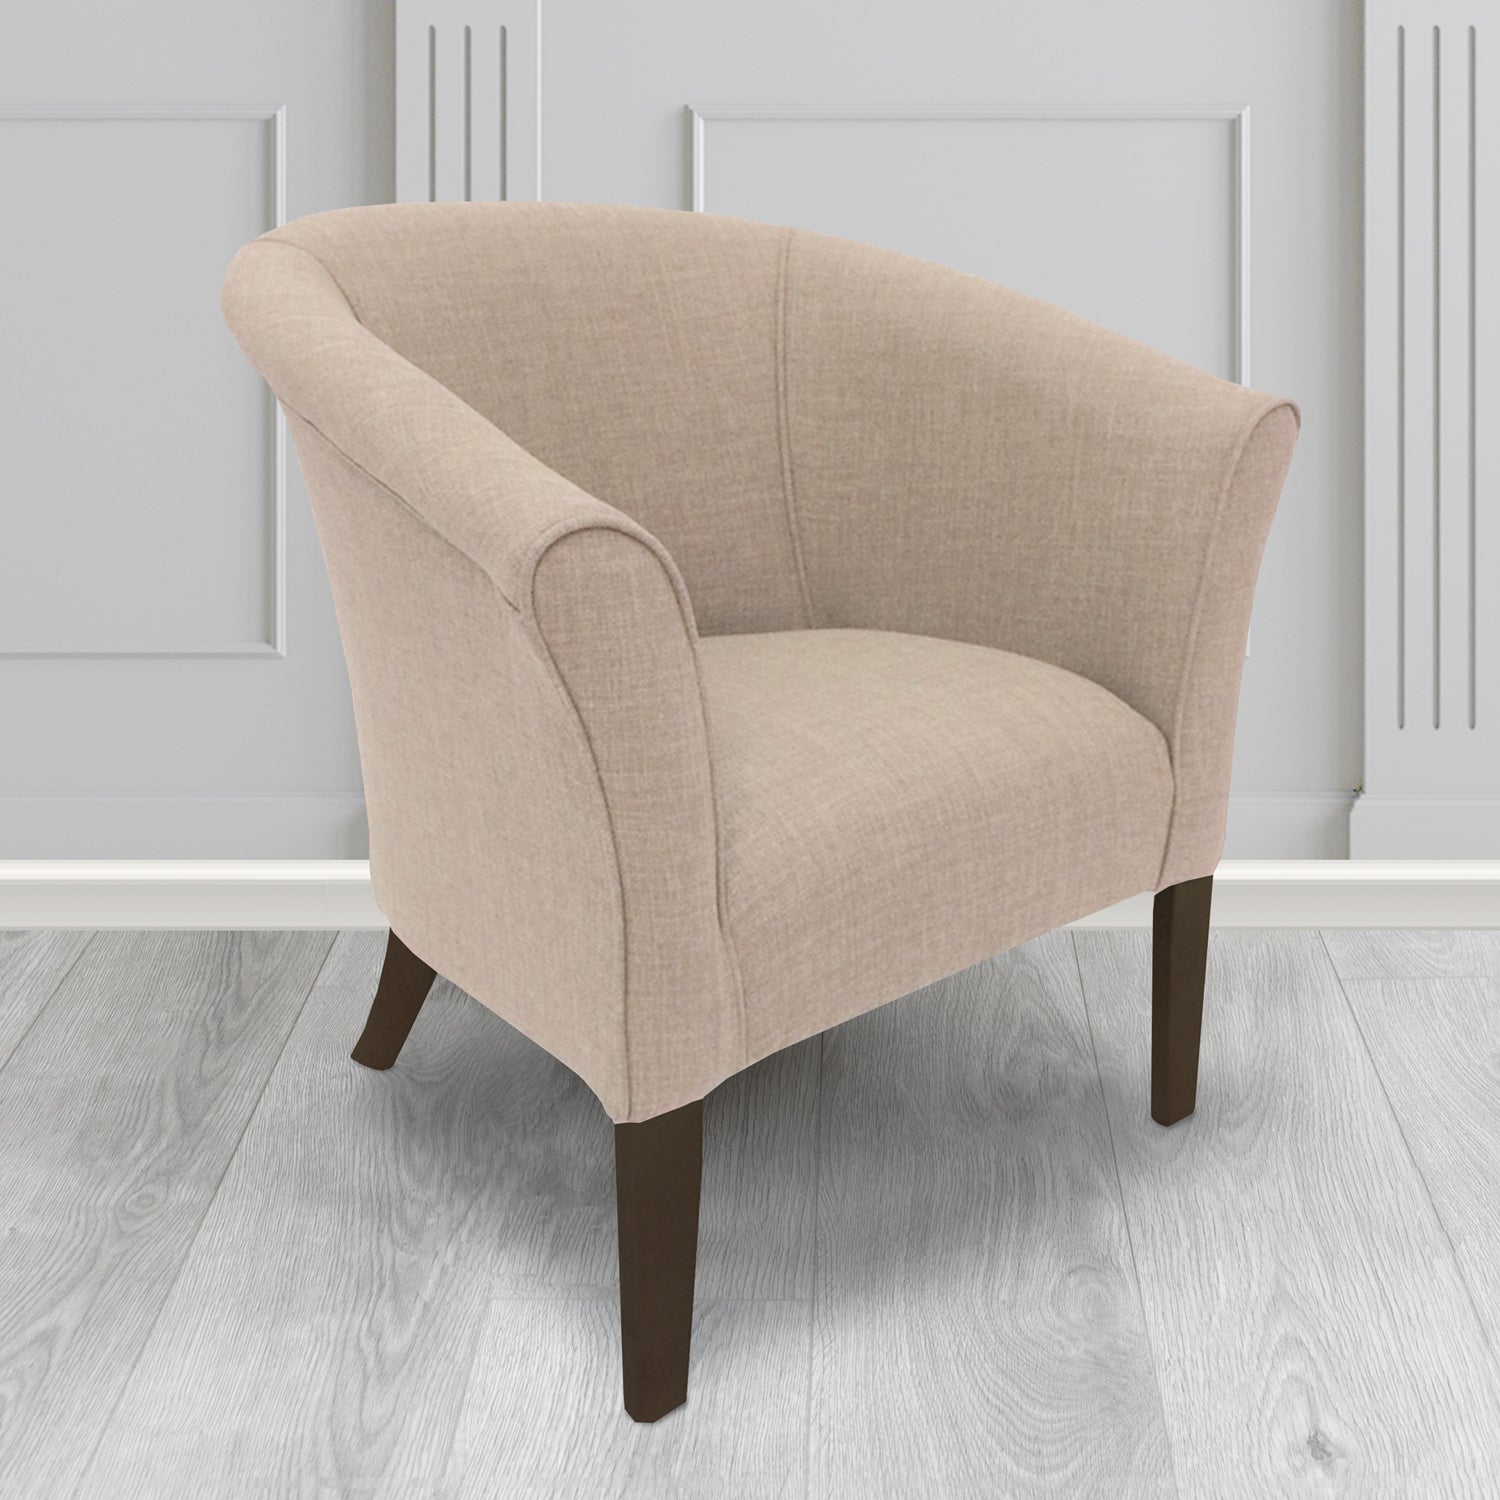 Quill Tub Chair in Linetta Cream Crib 5 Plain Fabric - Antimicrobial, Stain Resistant & Waterproof - The Tub Chair Shop